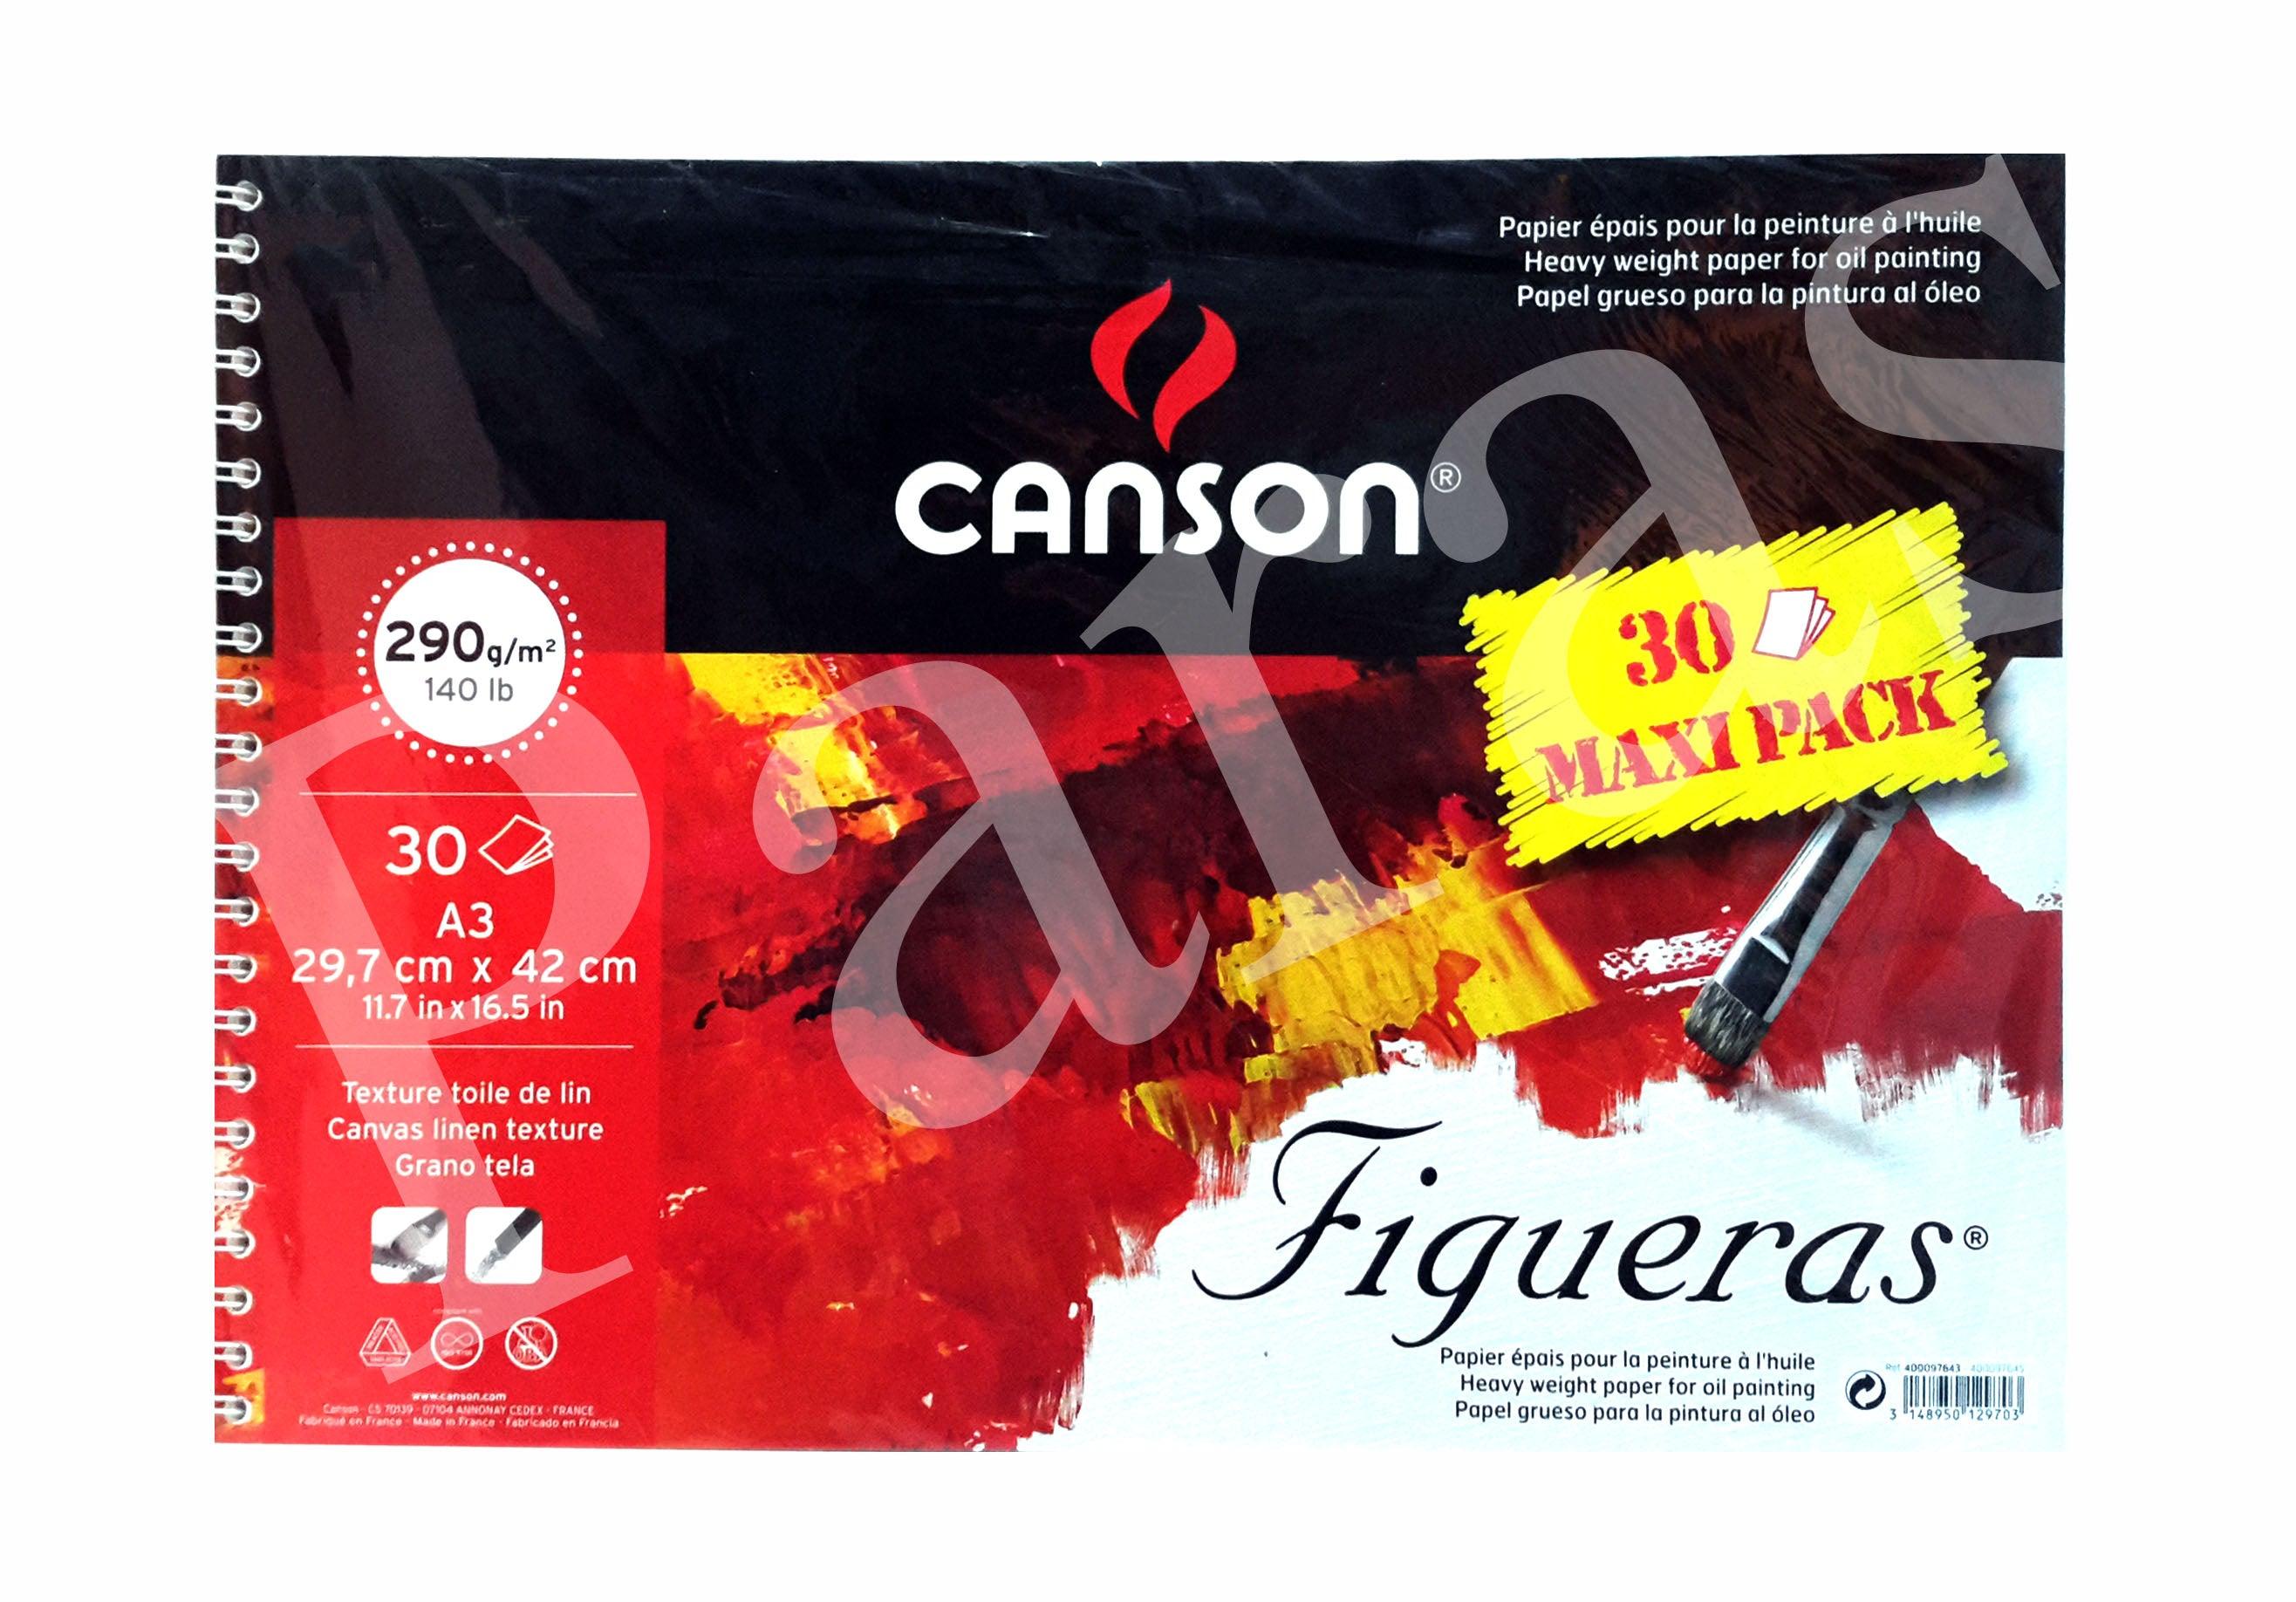 Canson Acrylic Oil Painting Figueras Spiral Sketch Book 30pages 290gsm - The Stationers